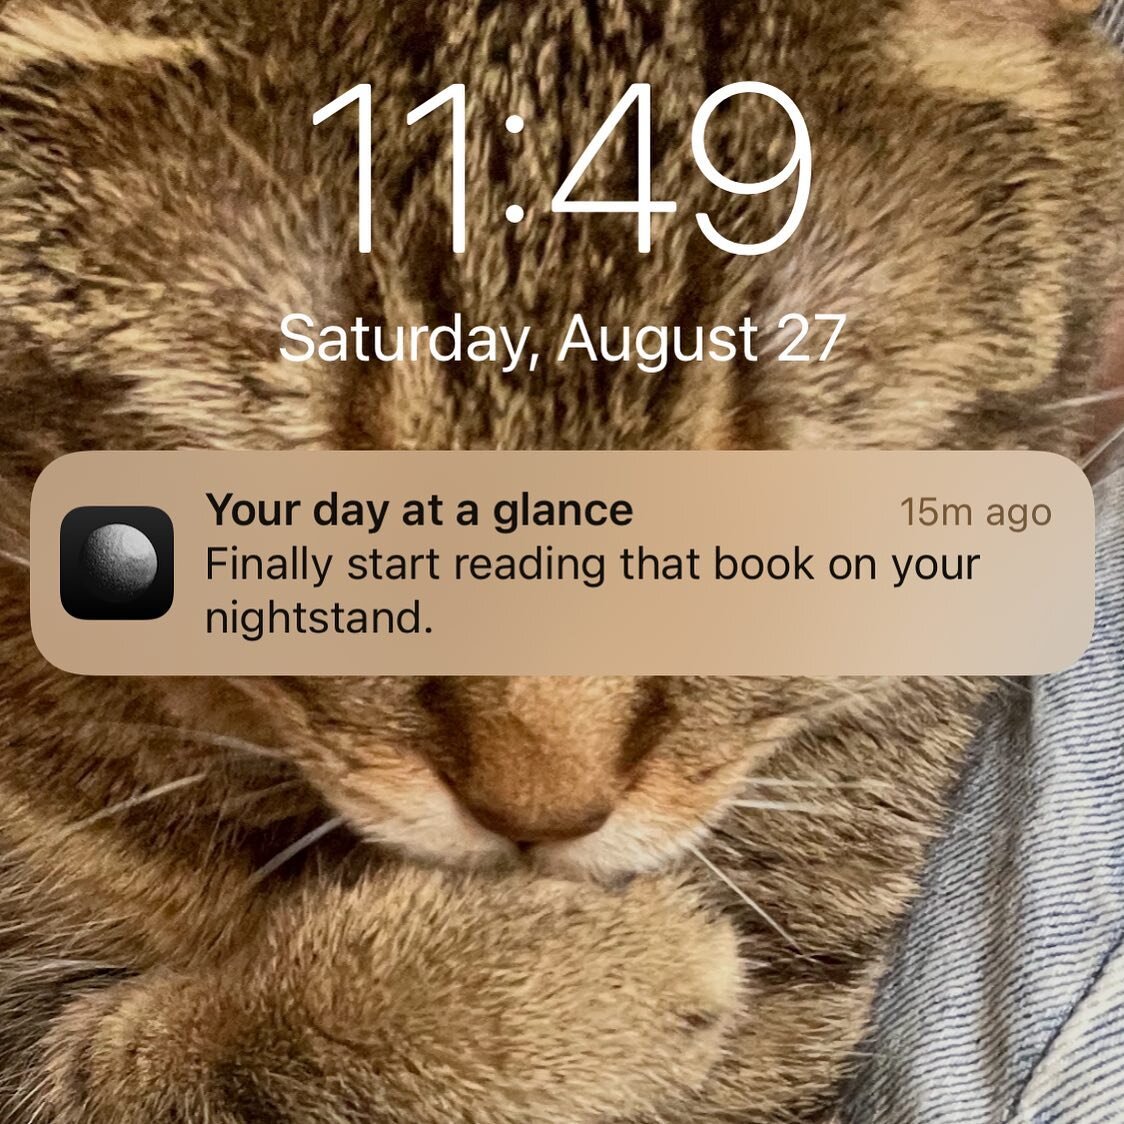 📞 Hi dad, can you pick me up? @costarastrology is bullying me again.